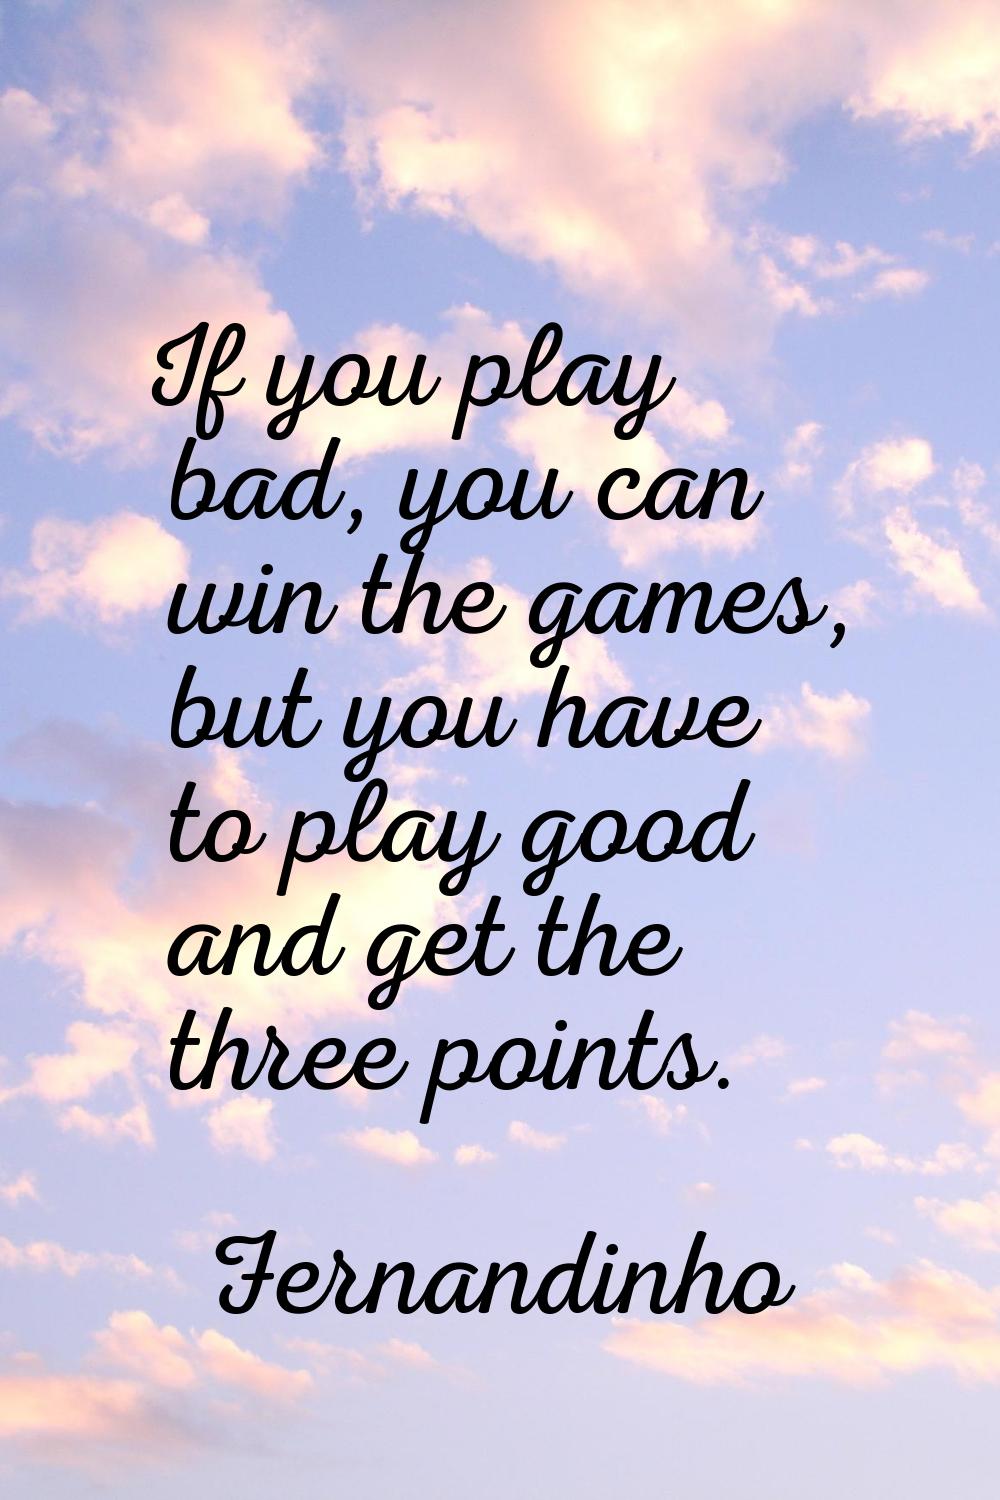 If you play bad, you can win the games, but you have to play good and get the three points.